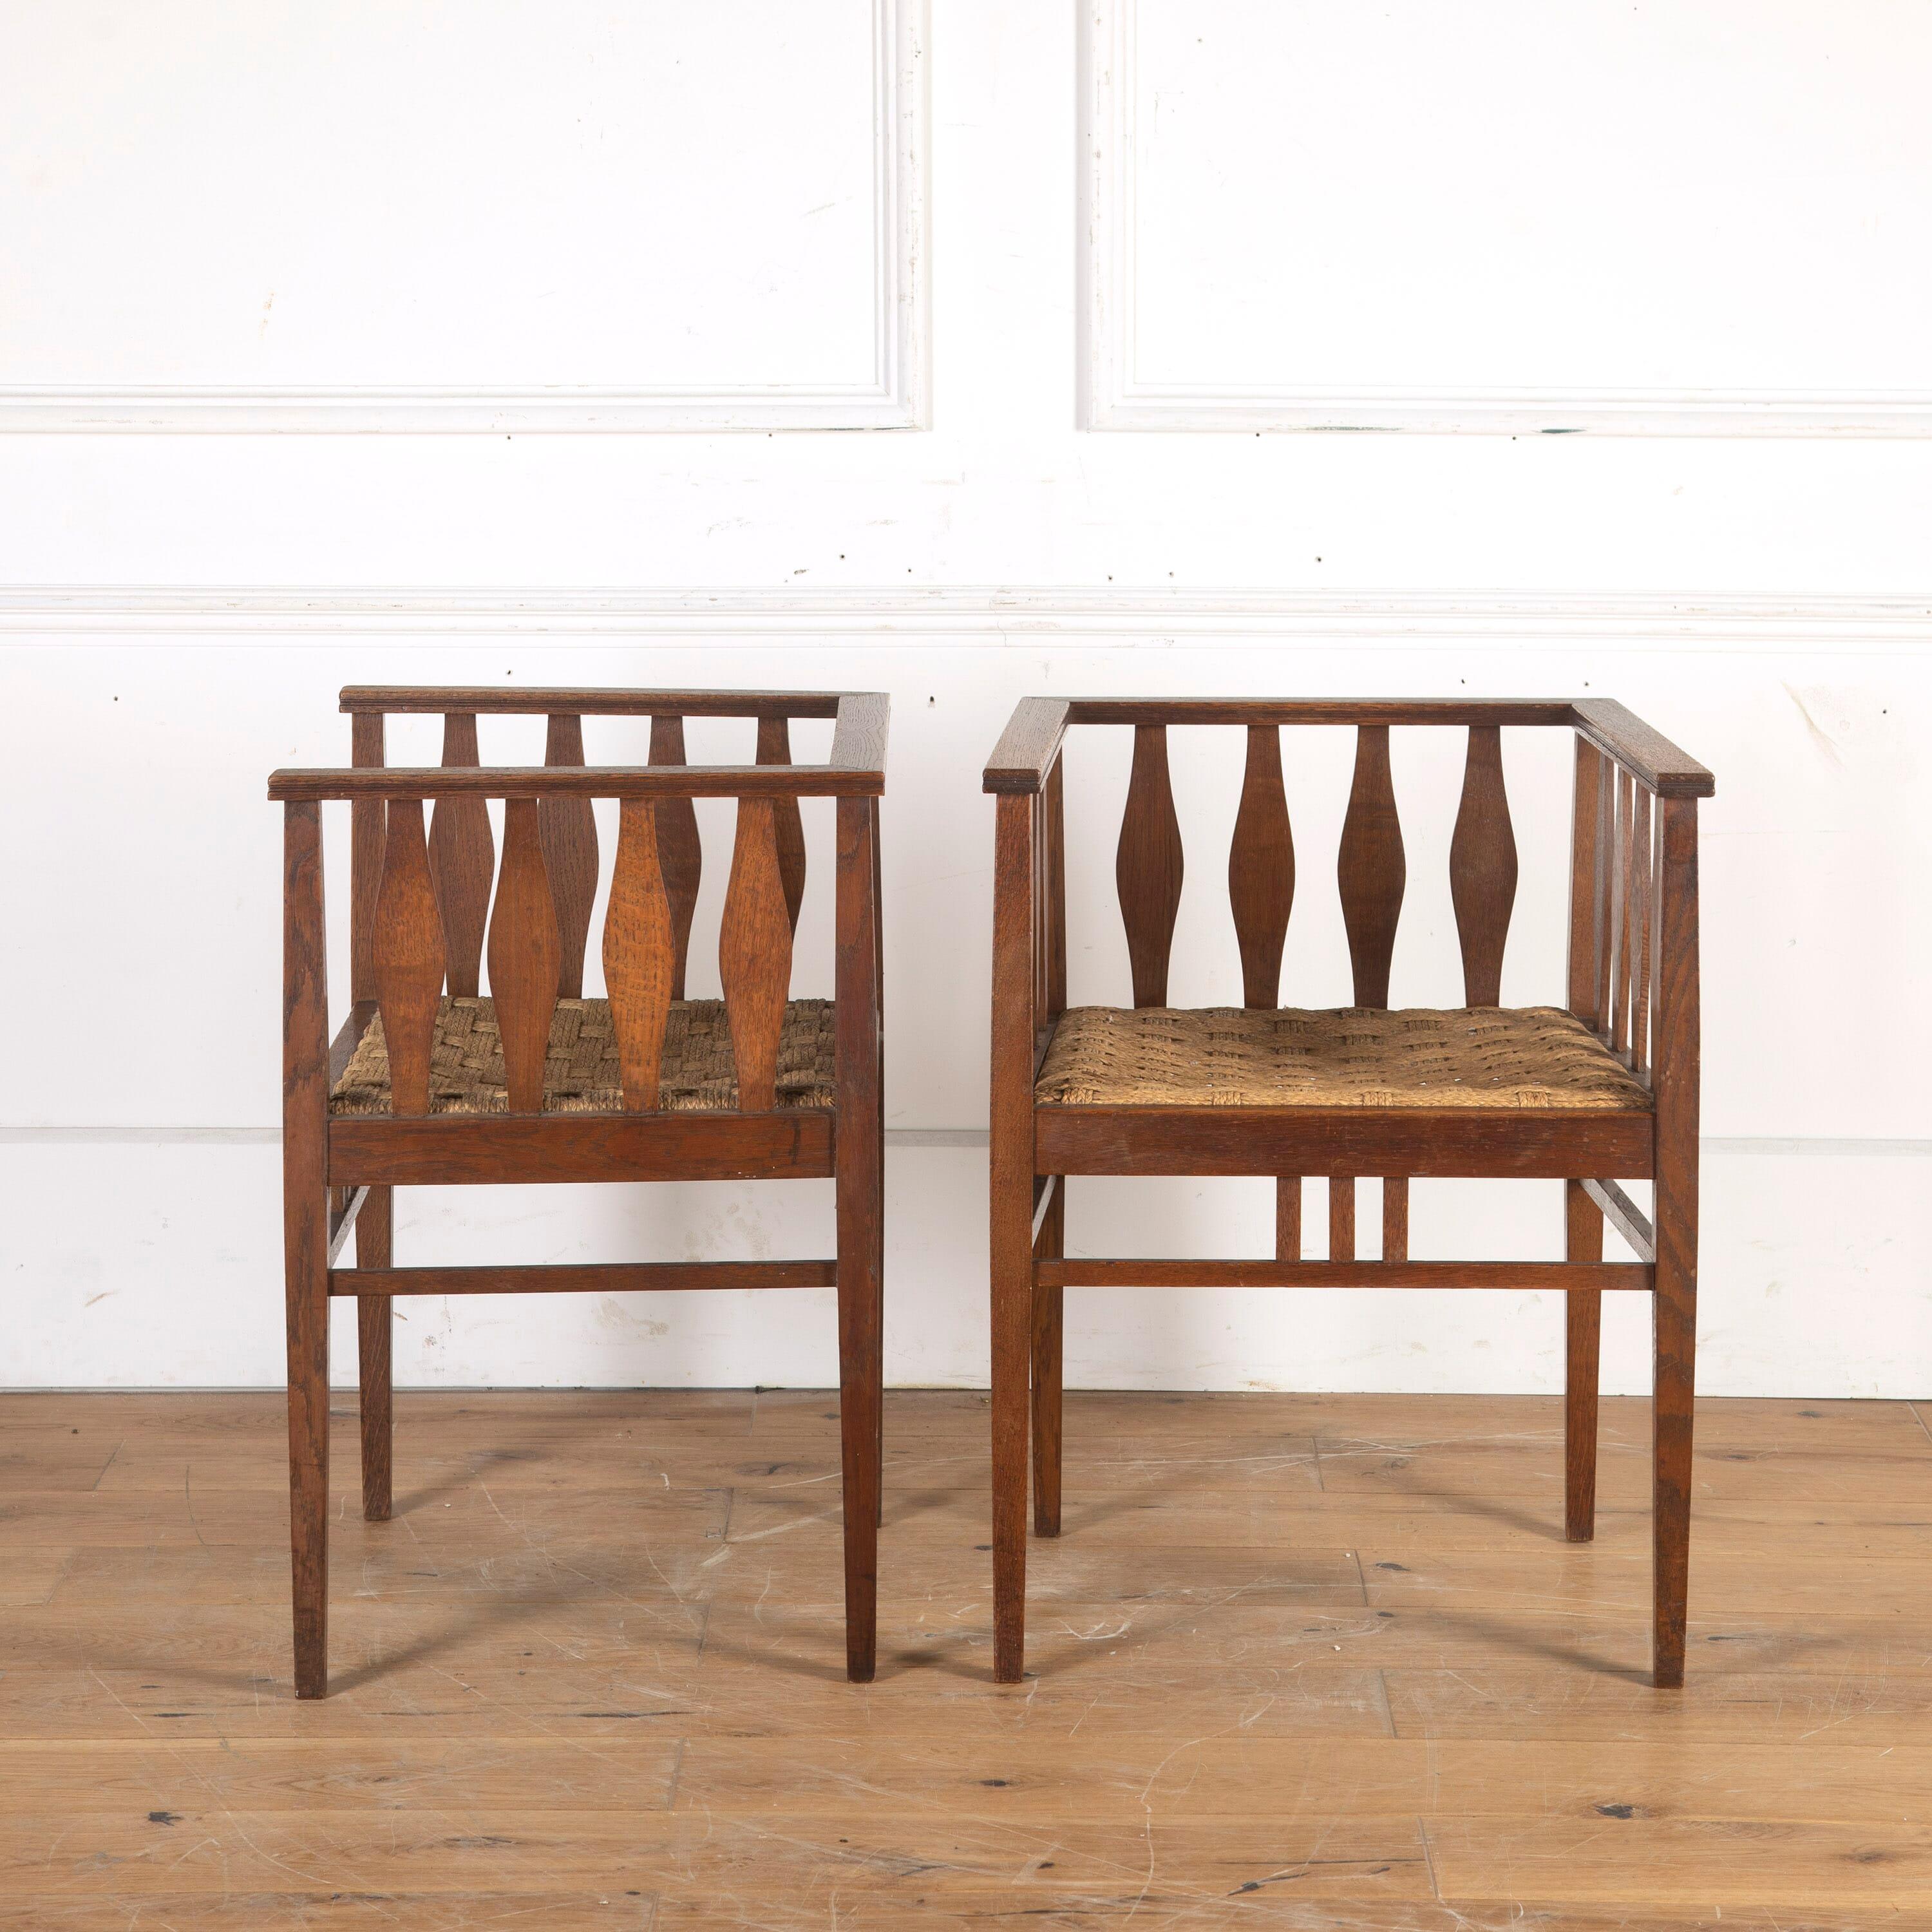 English Pair of Arts & Crafts Oak Chairs